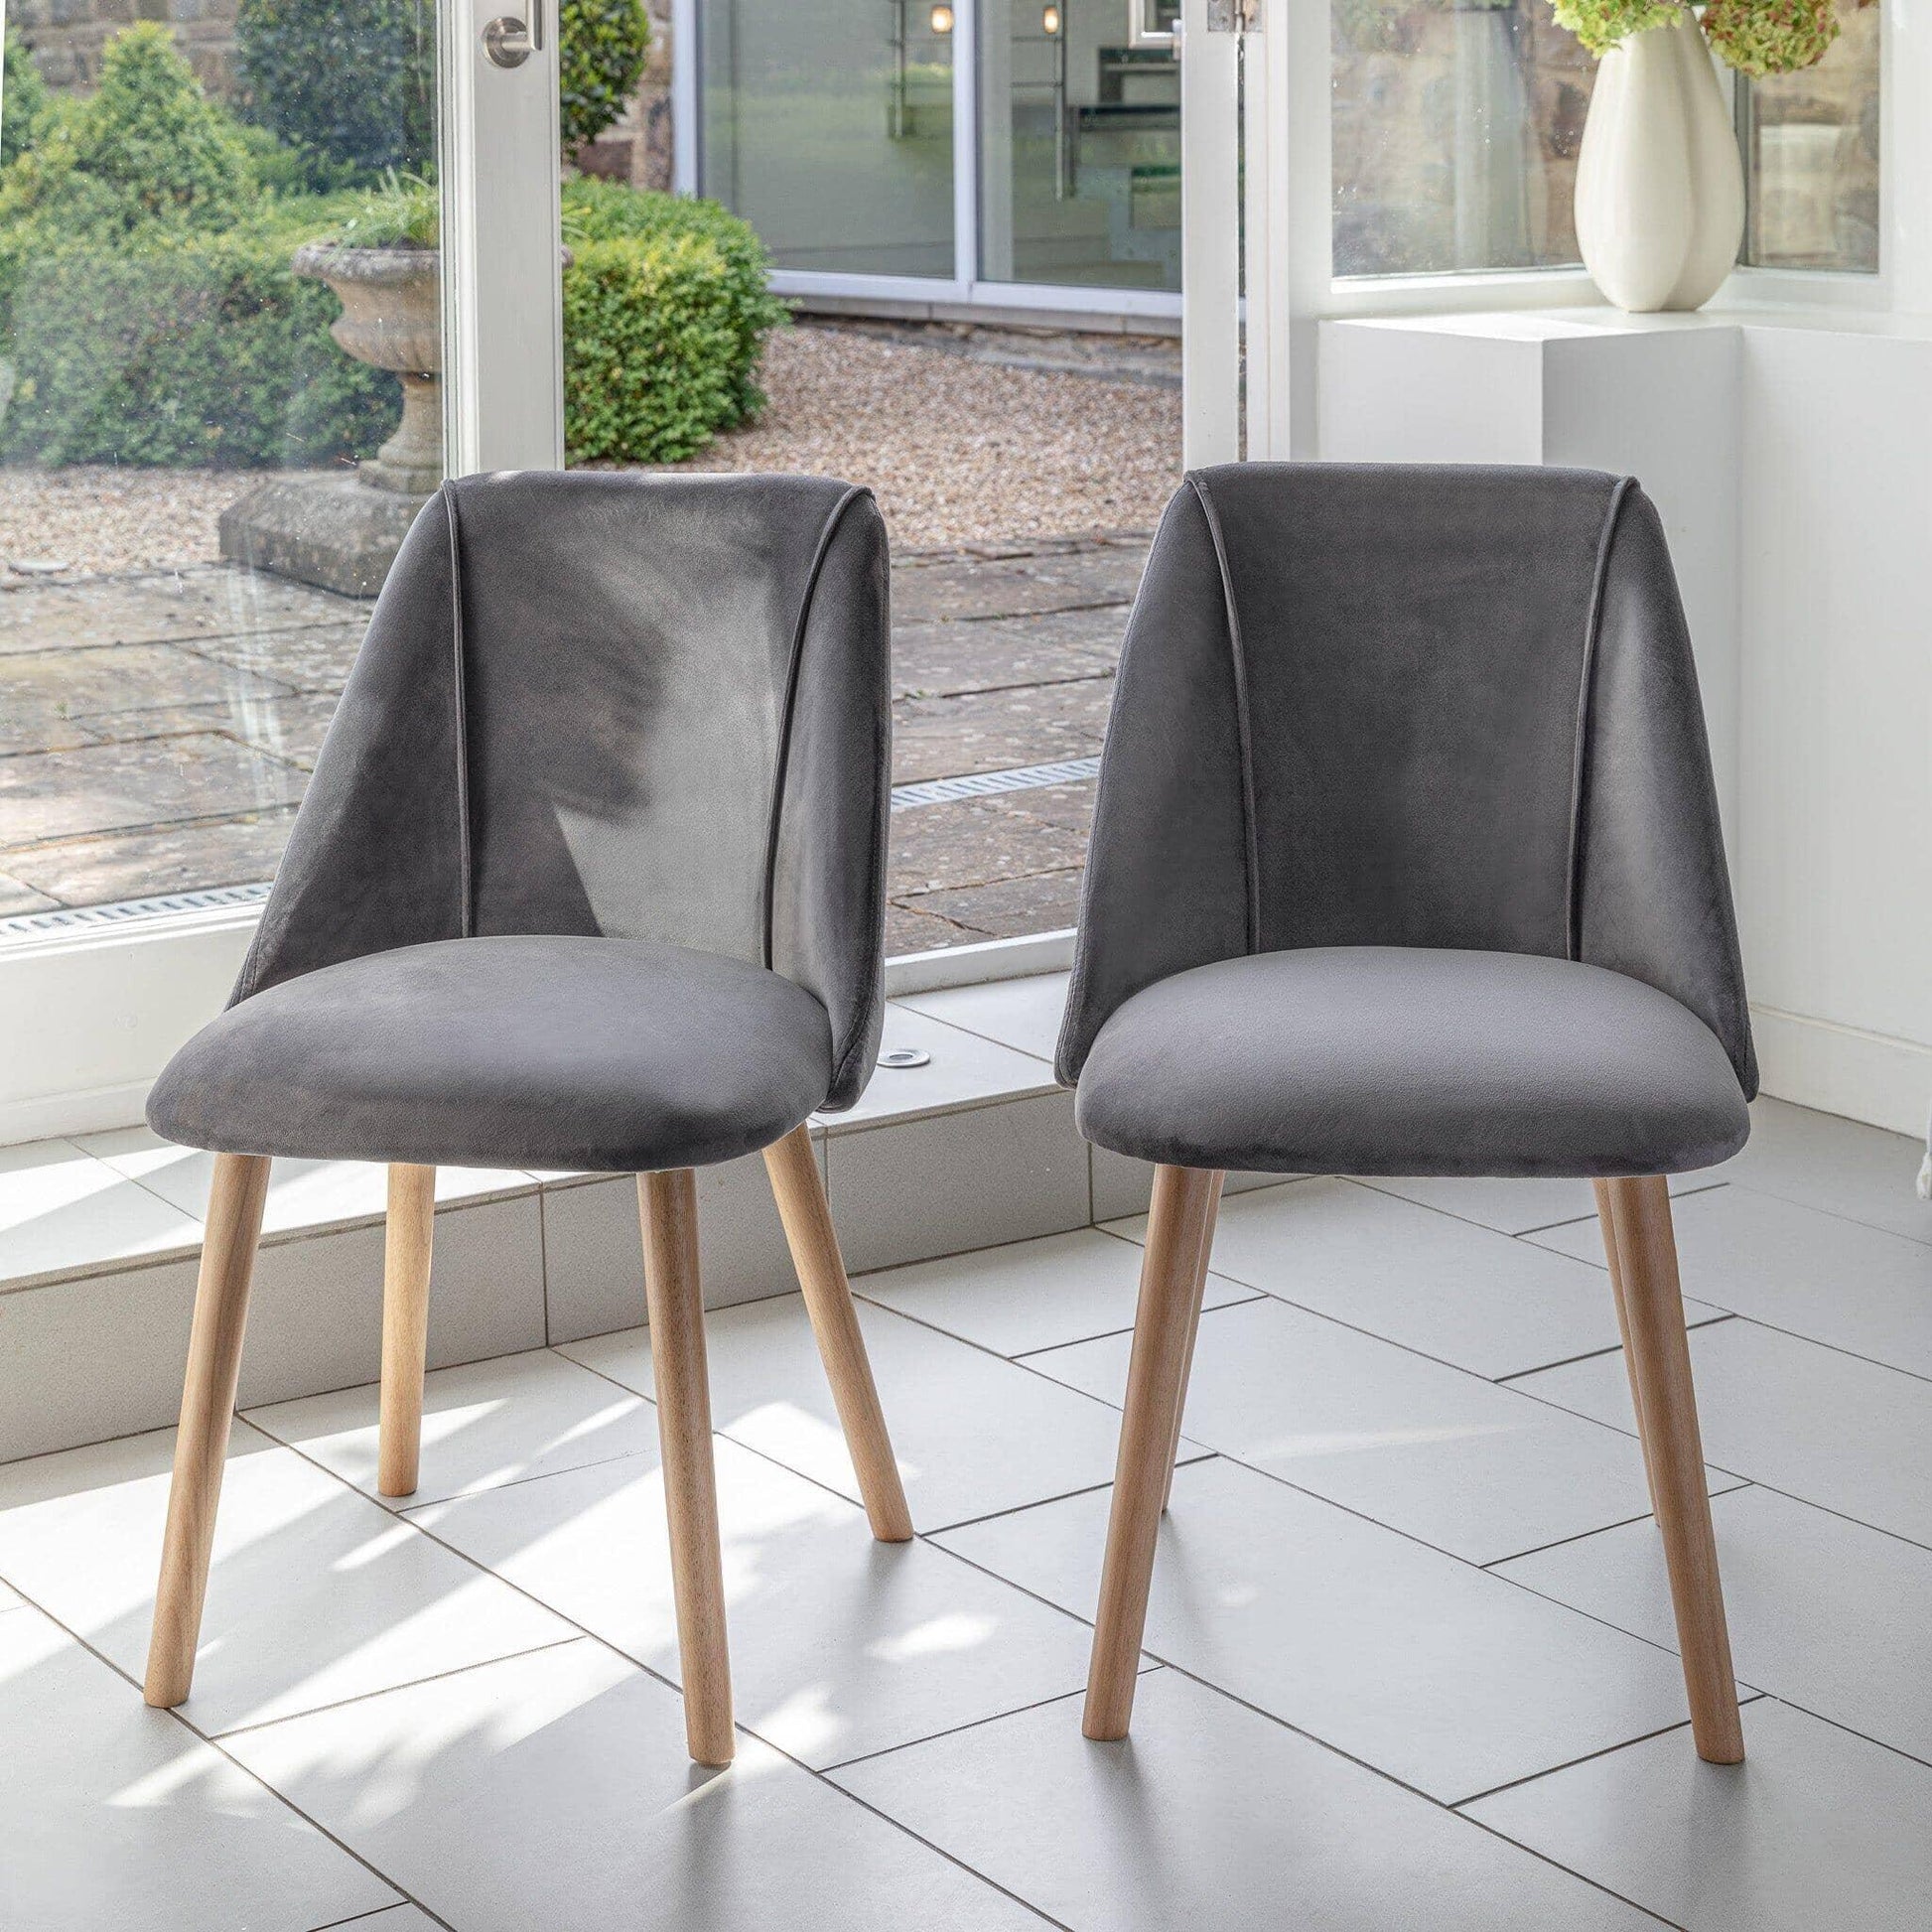 Ella Pale Oak Dining Table Set - 6 Seater - Freya Grey Dining Chairs With Pale Oak Legs - Laura James